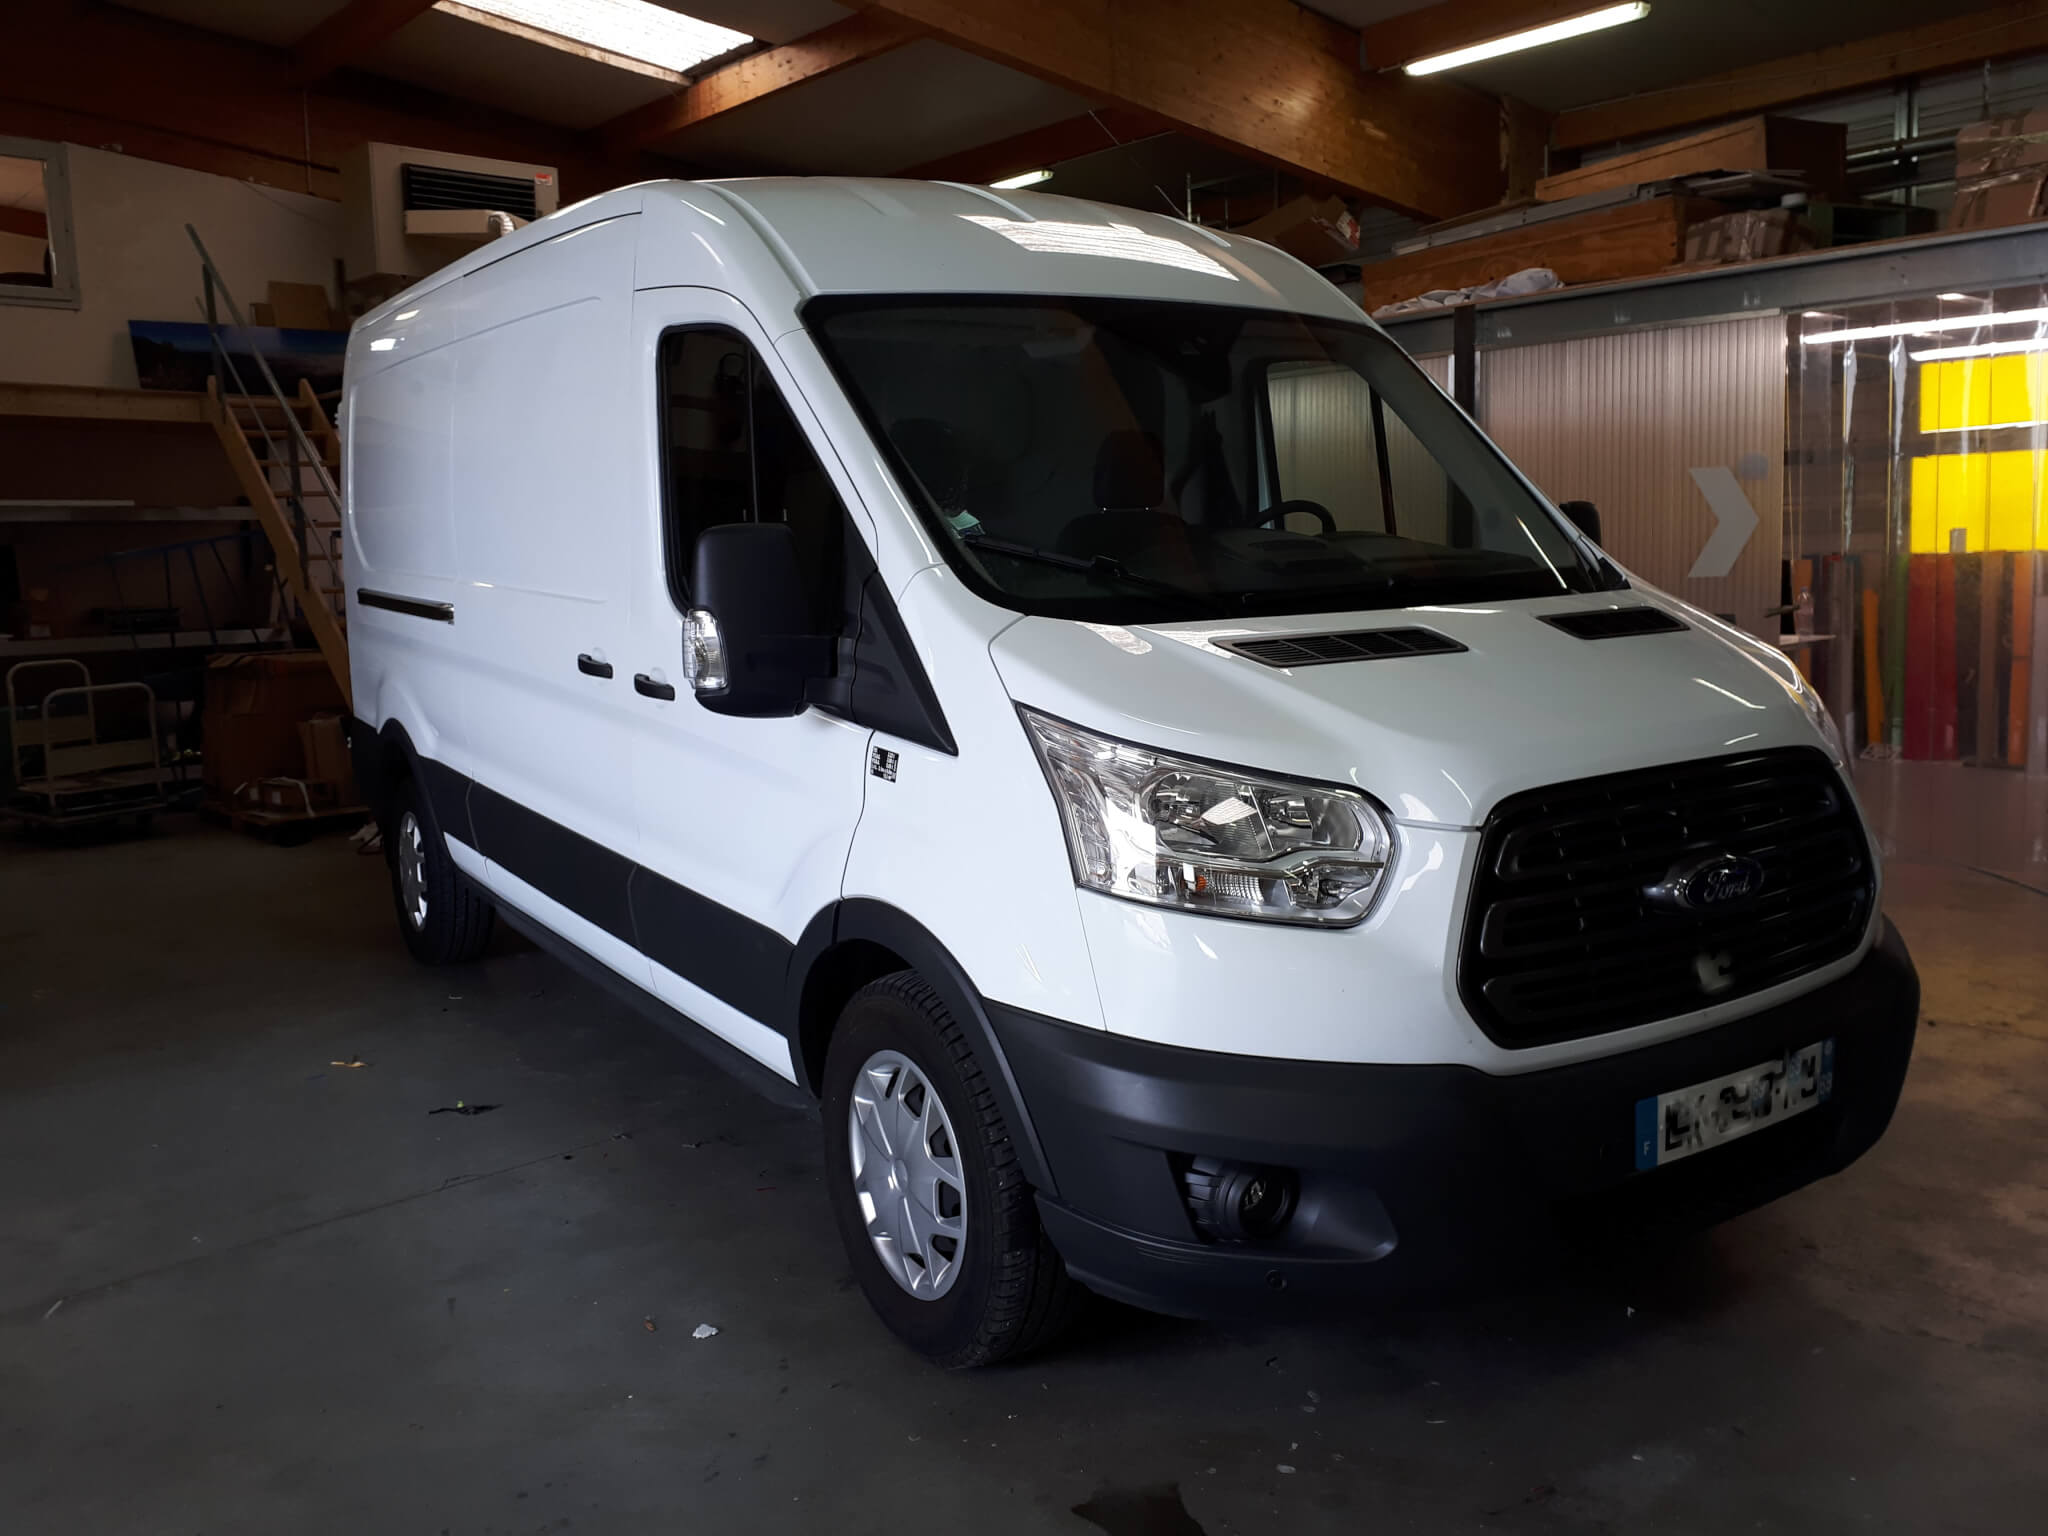 Covering Ford Transit- Avant Covering